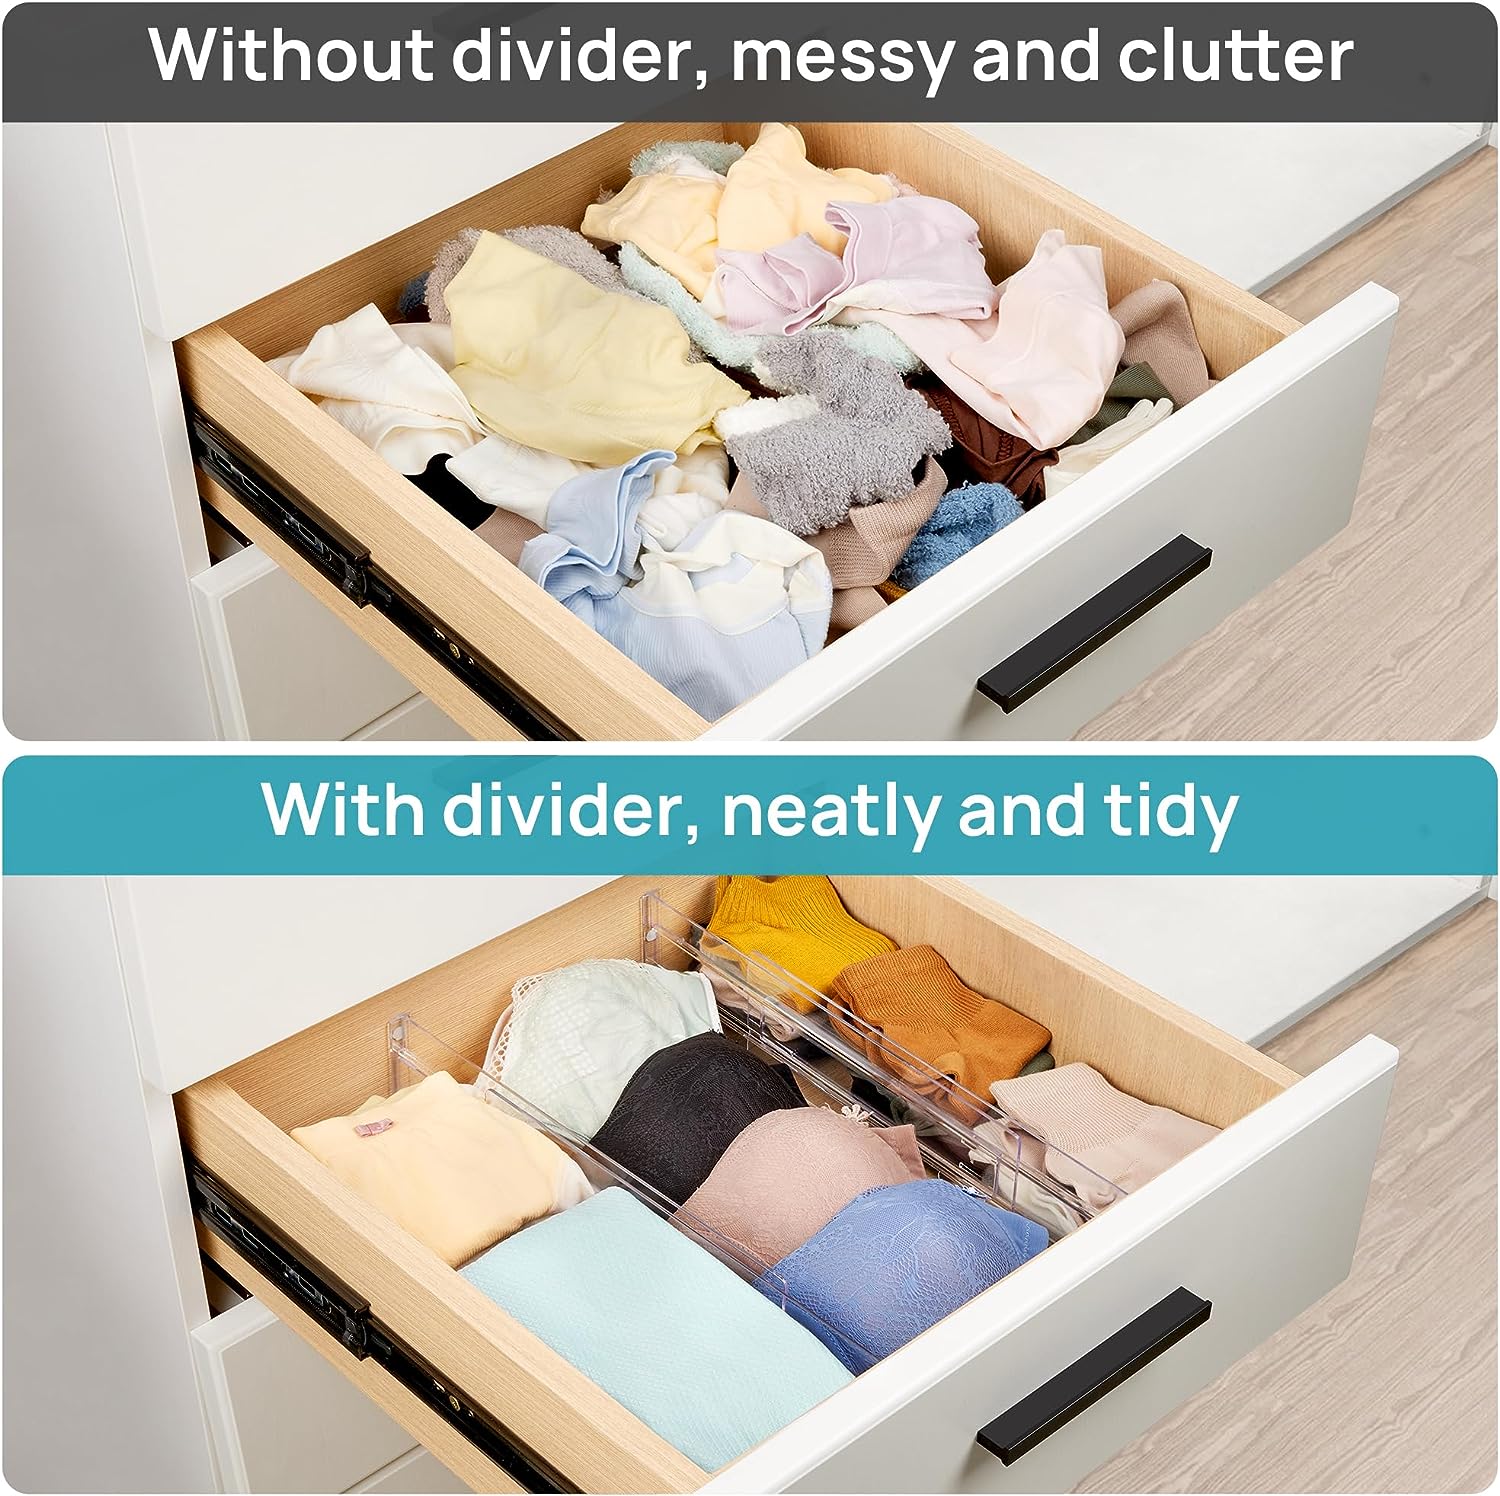 Vtopmart 8 Pack Drawer Dividers, 3.2" High Expandable from 12.2-21.7" Adjustable Drawer Organisers，Clear Plastic Drawers Separators for Clothing, Kitchen Utensils and Office Storage-0003